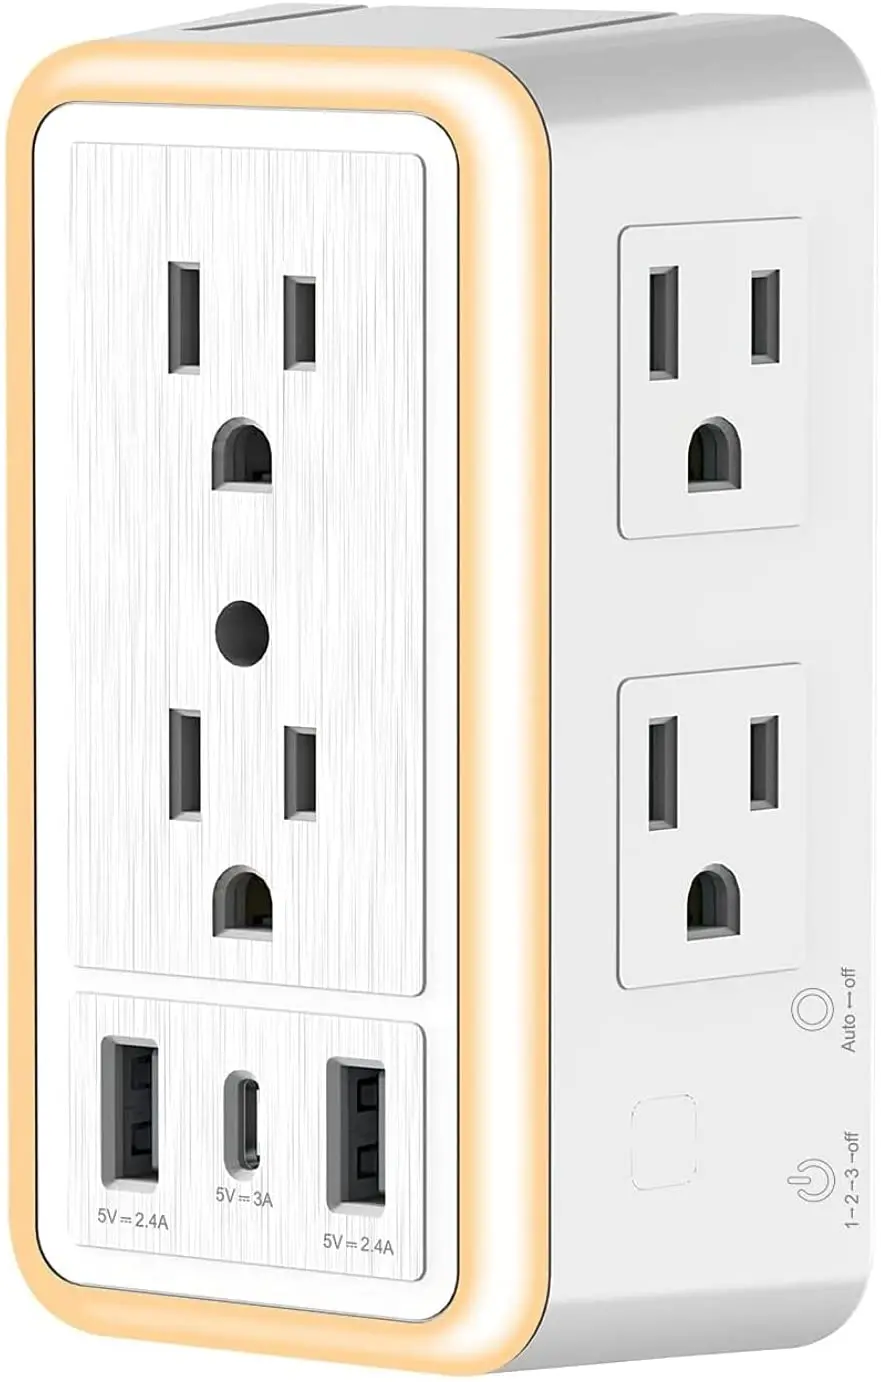 

USB Wall Charger, Surge Protector with Night Light, RadeTek 6 Outlet Extender with 2 USB Charging Ports( 4.8A Total), 1 USB C